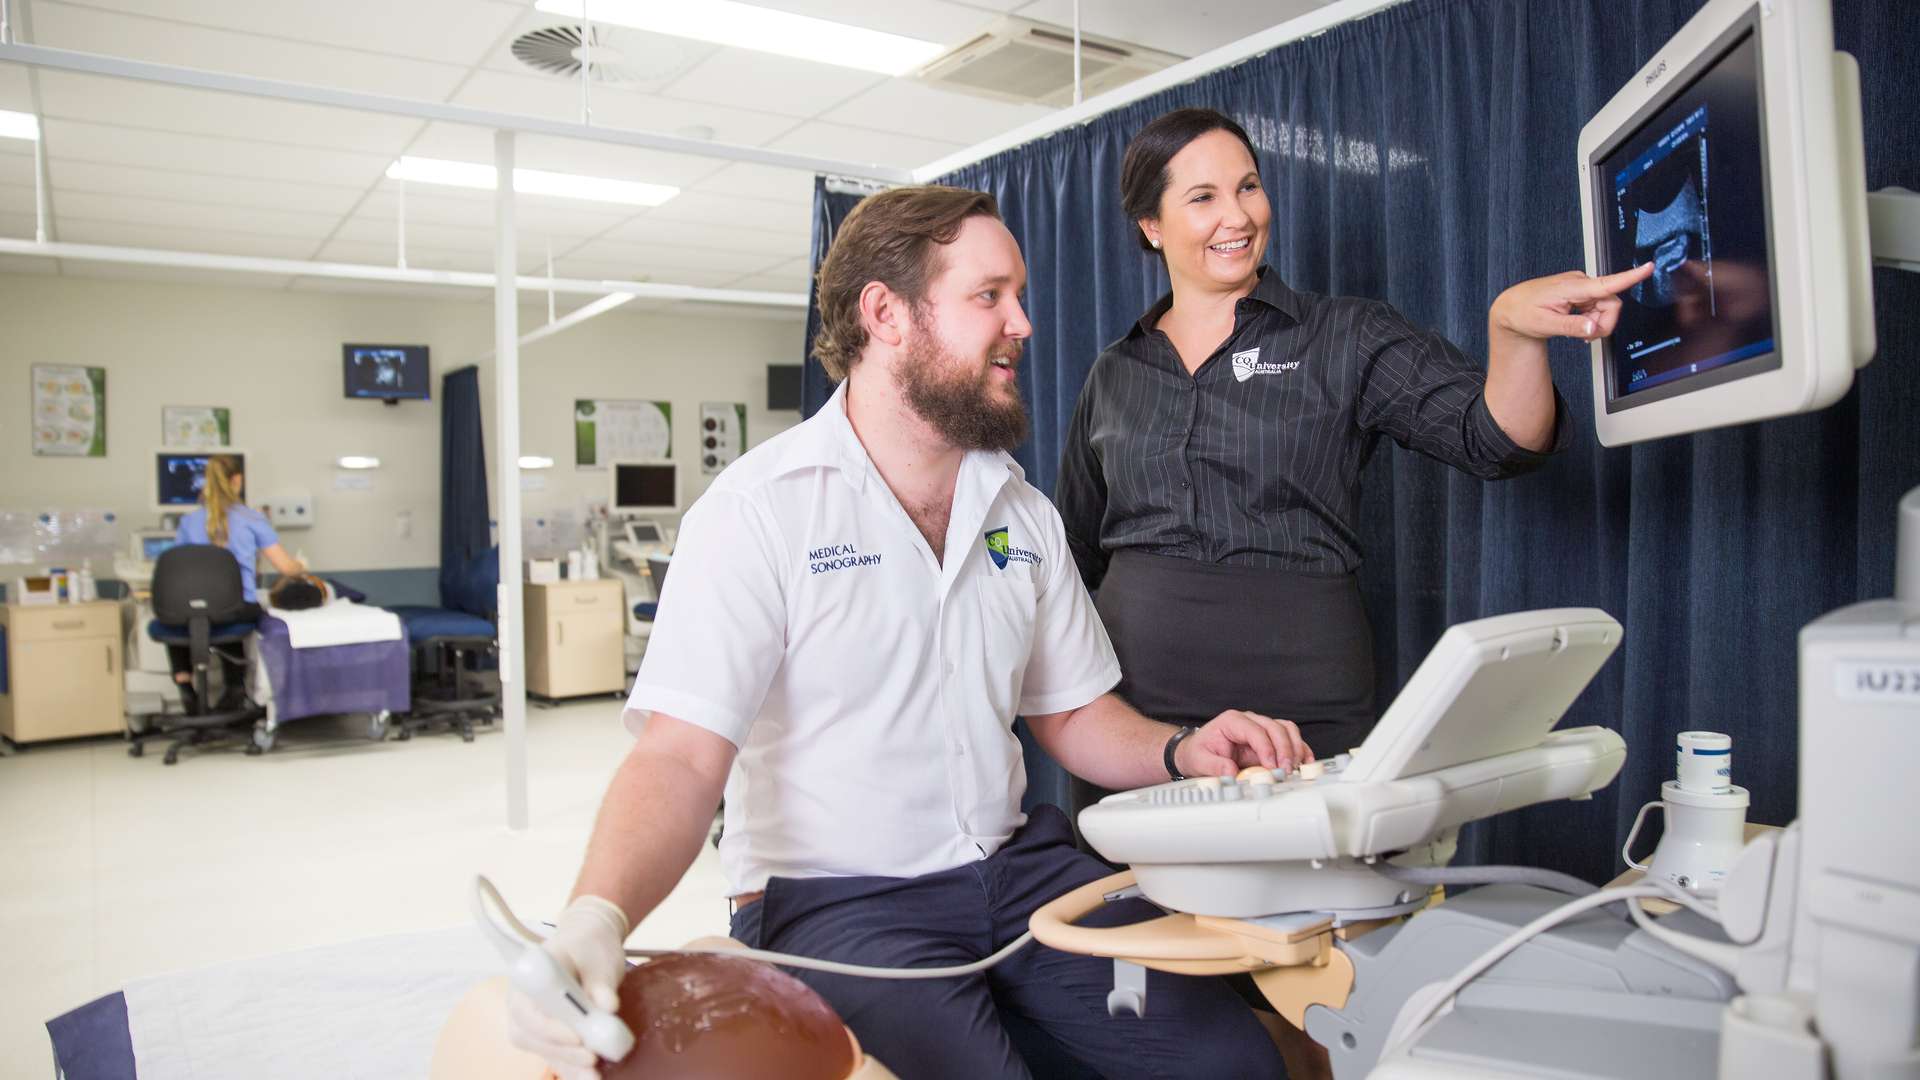 Instructor guiding student using a Sonography Machine